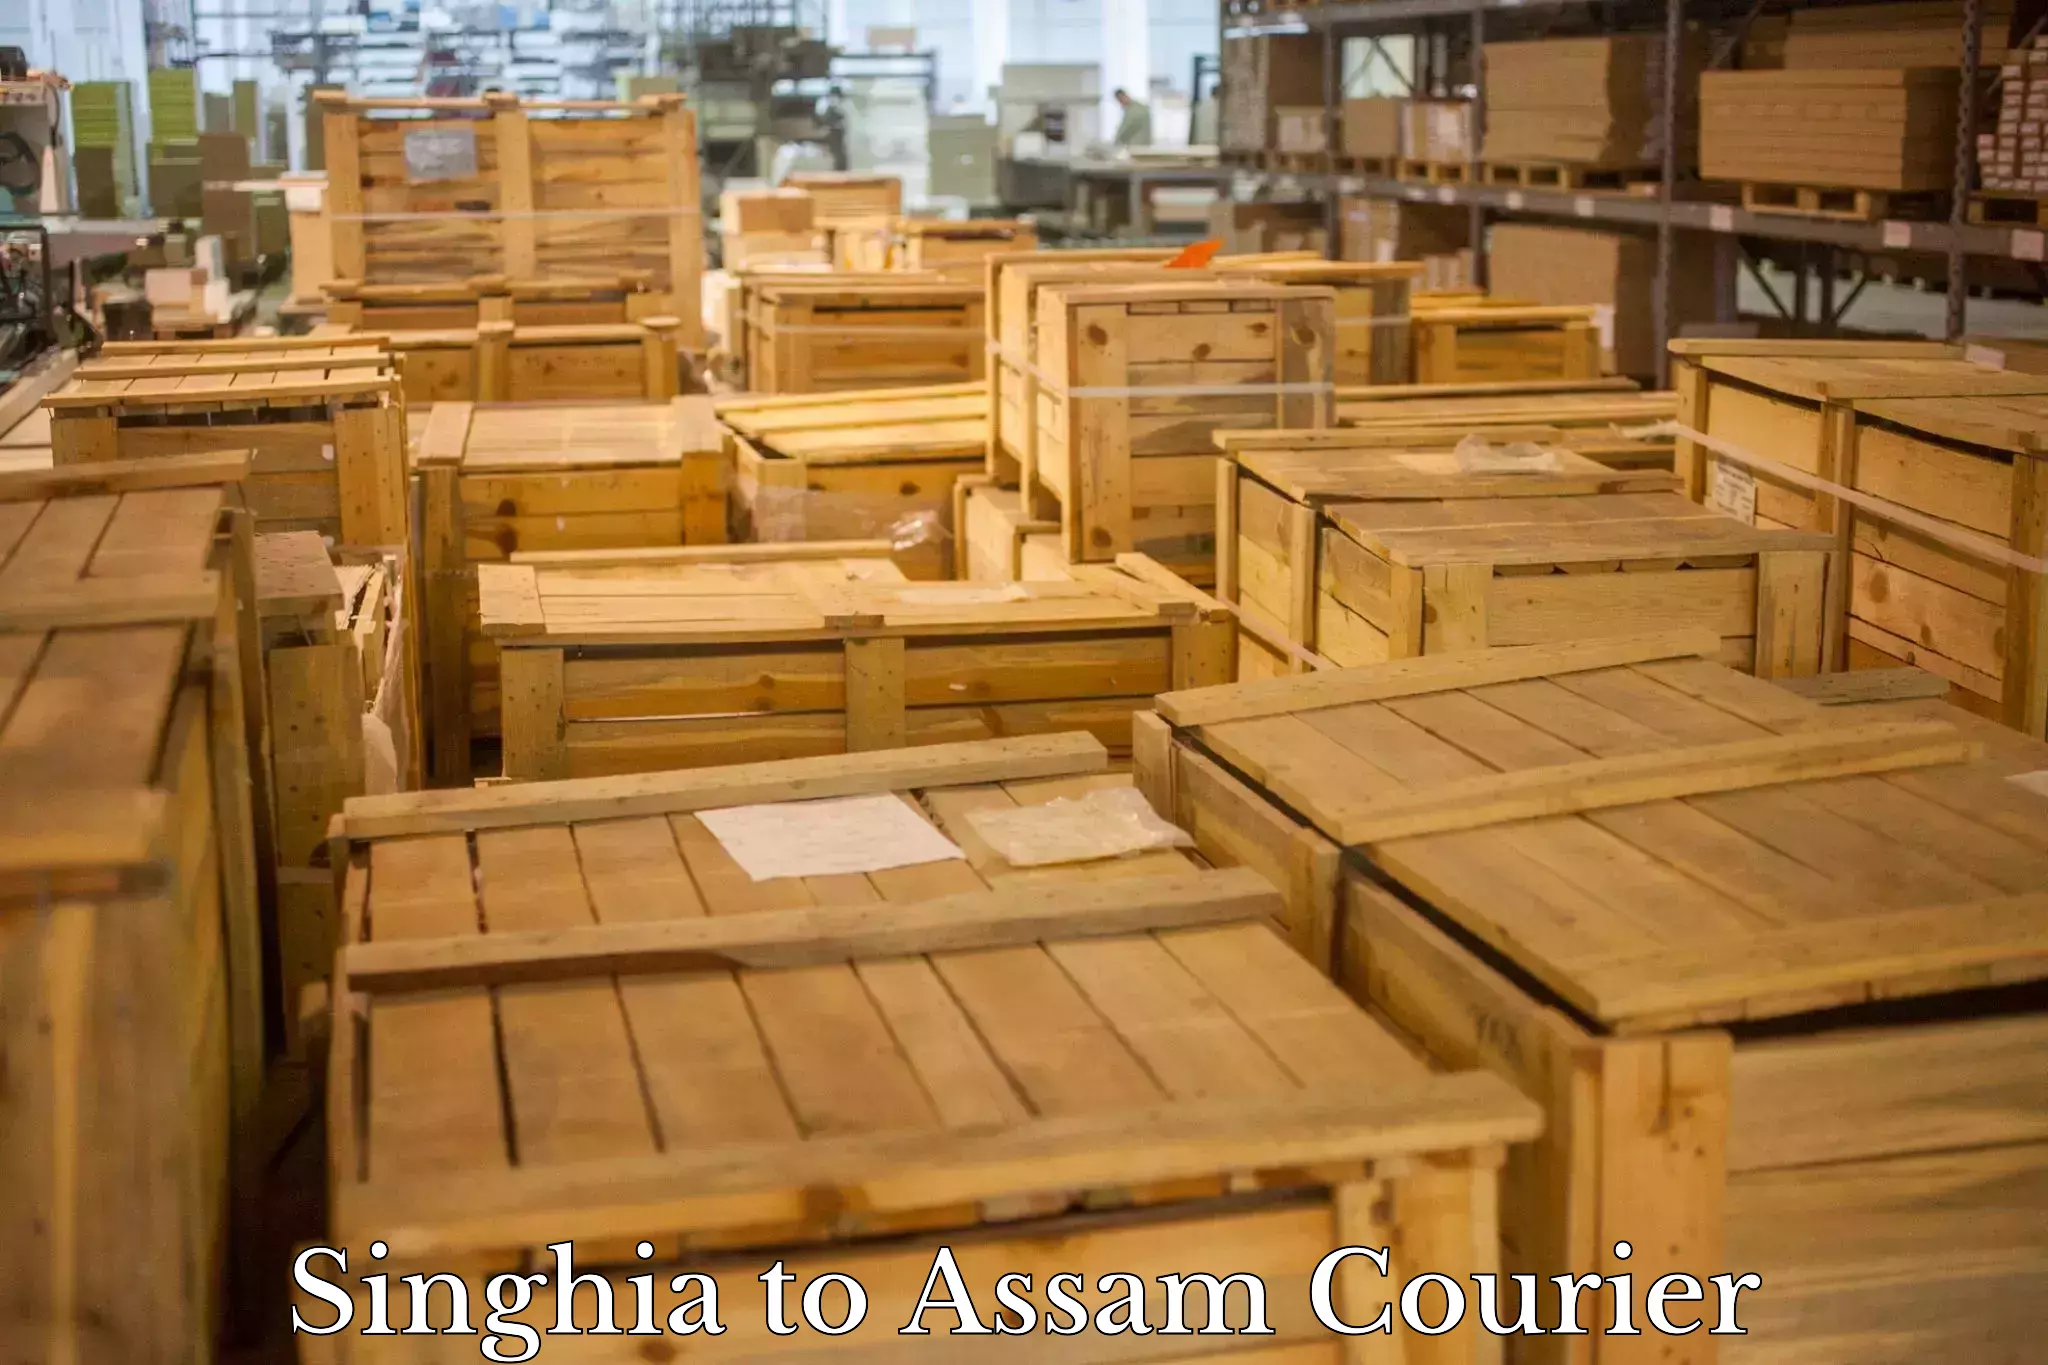 Seamless shipping experience Singhia to Dibrugarh